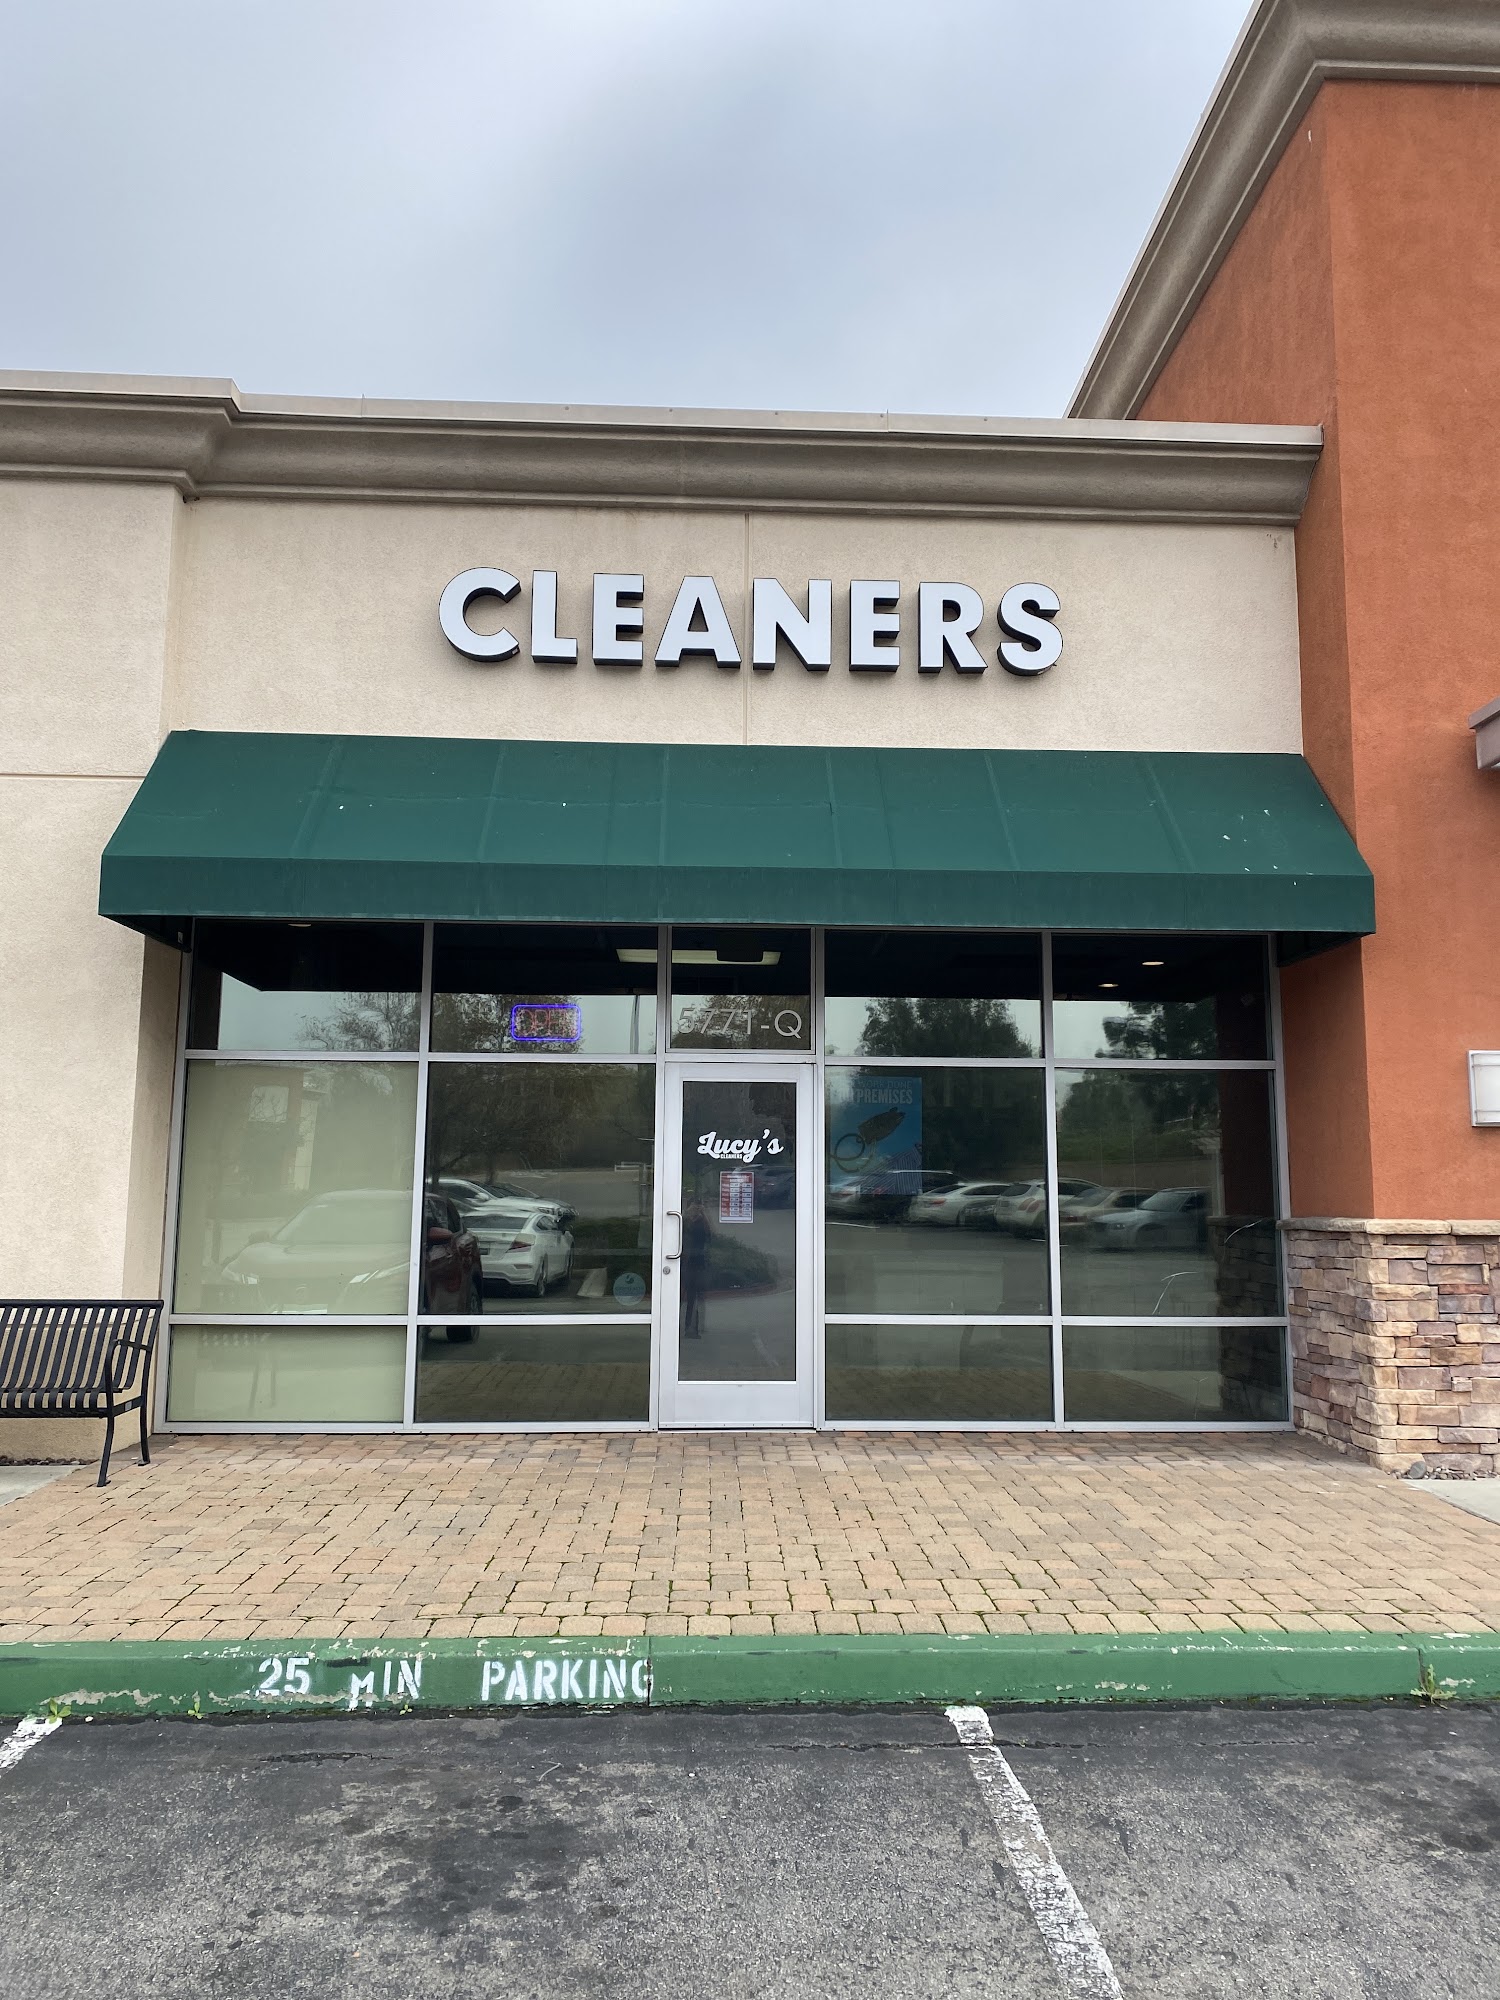 Lucy’s Cleaners